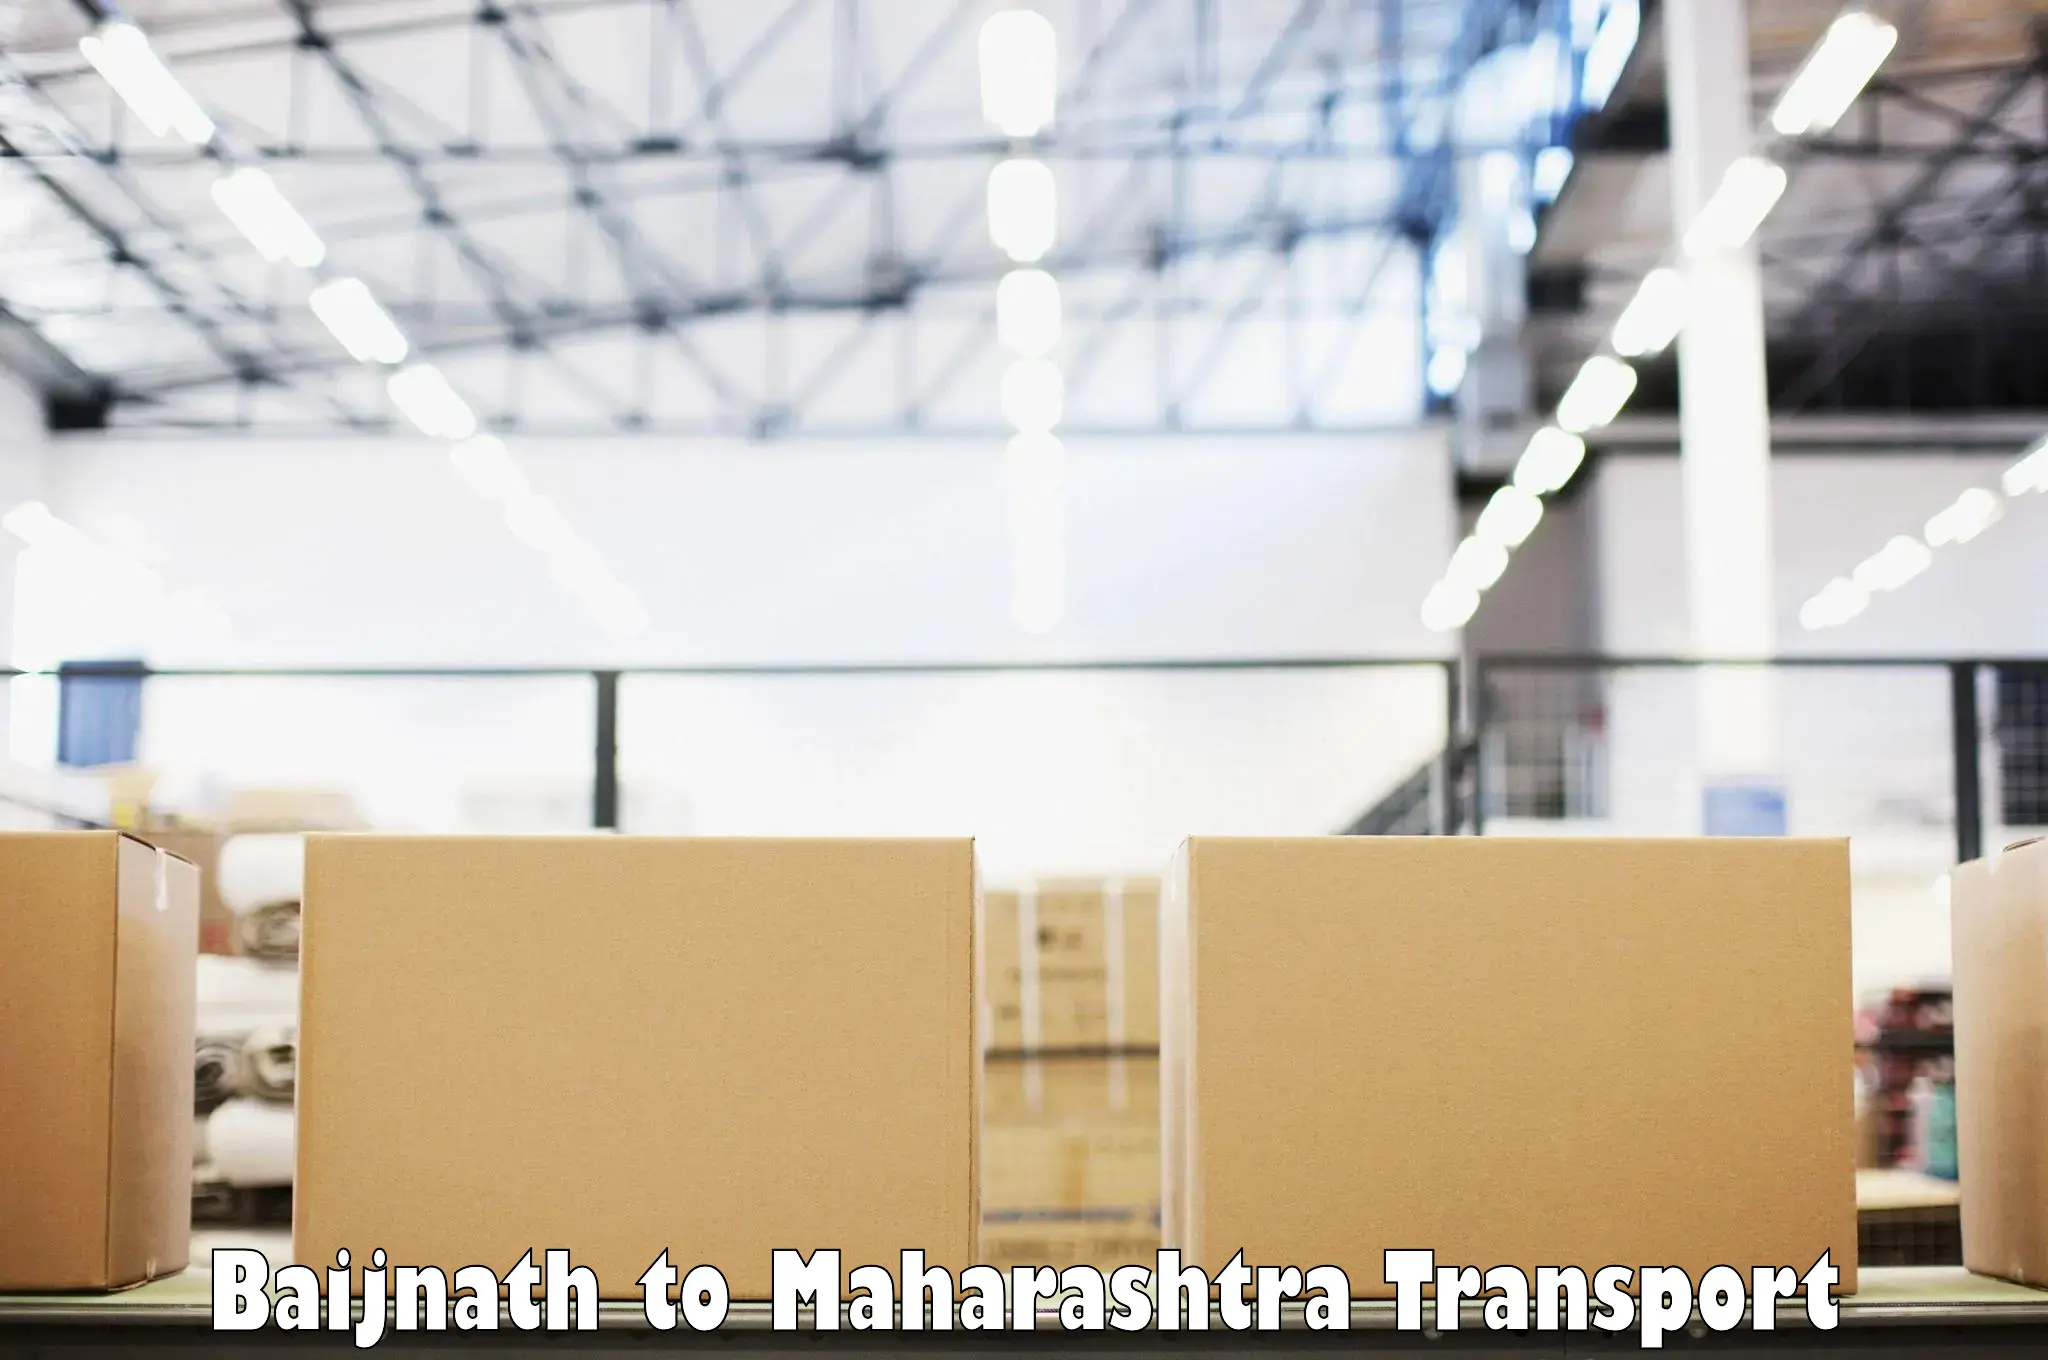 Road transport online services in Baijnath to Andheri